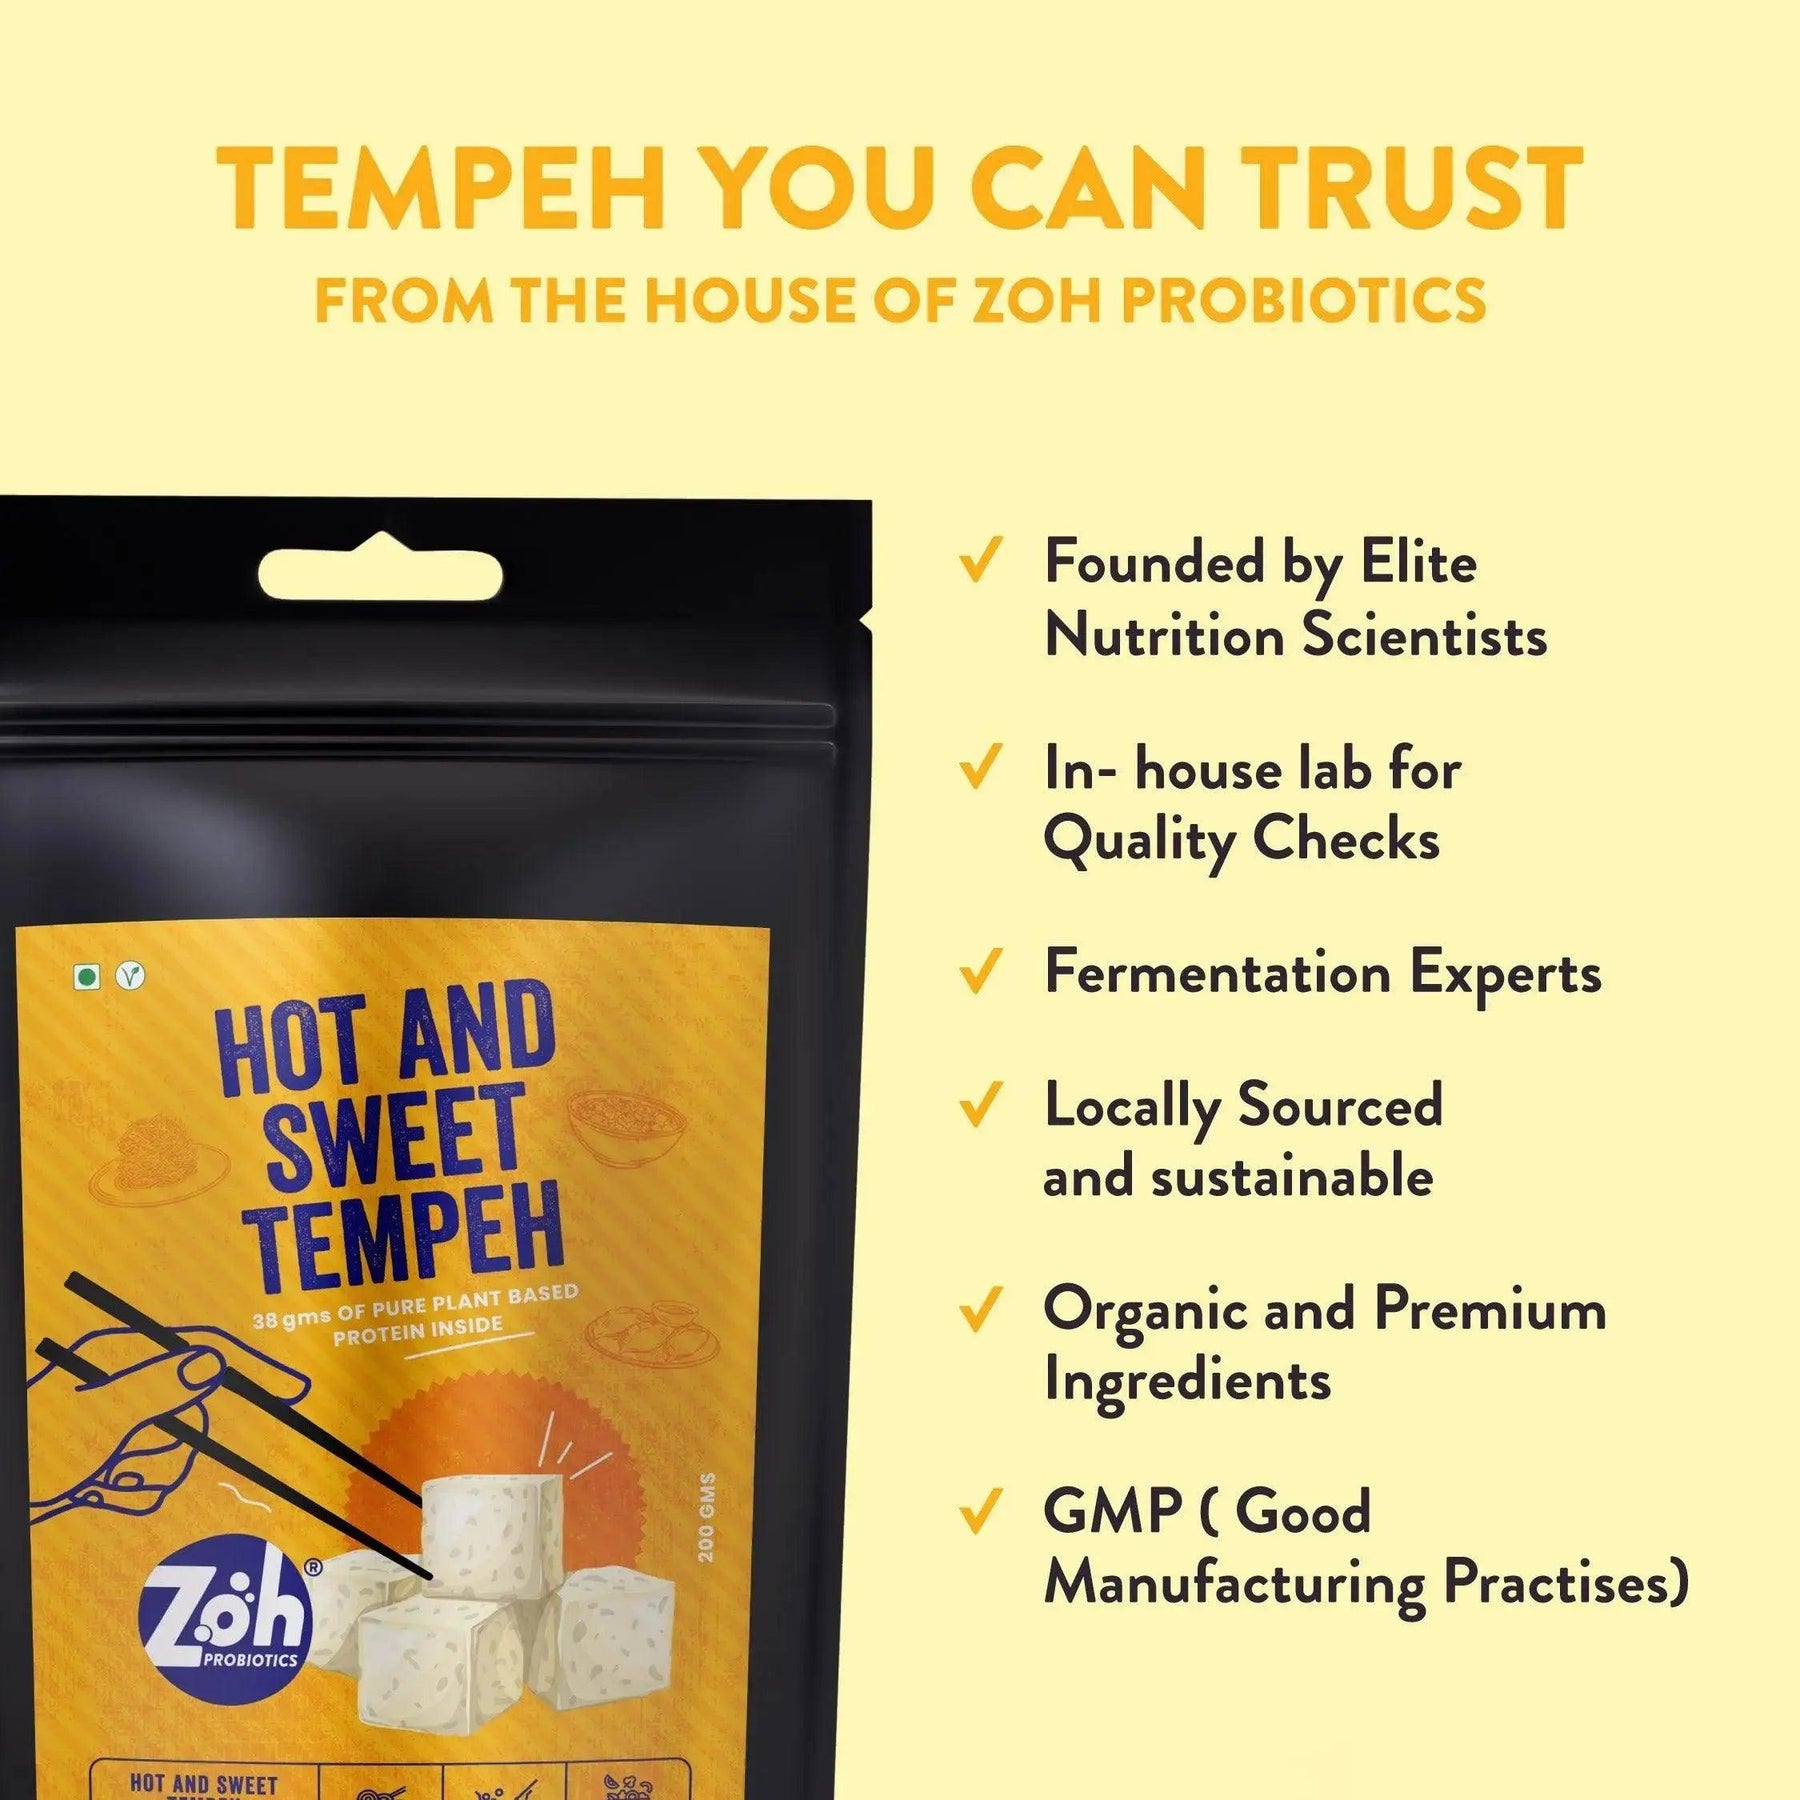 Bulk tempeh in Mumbai: Trustworthy Zoh Hot and Sweet, Nutritionist-founded, Organic Ingredients, GMP